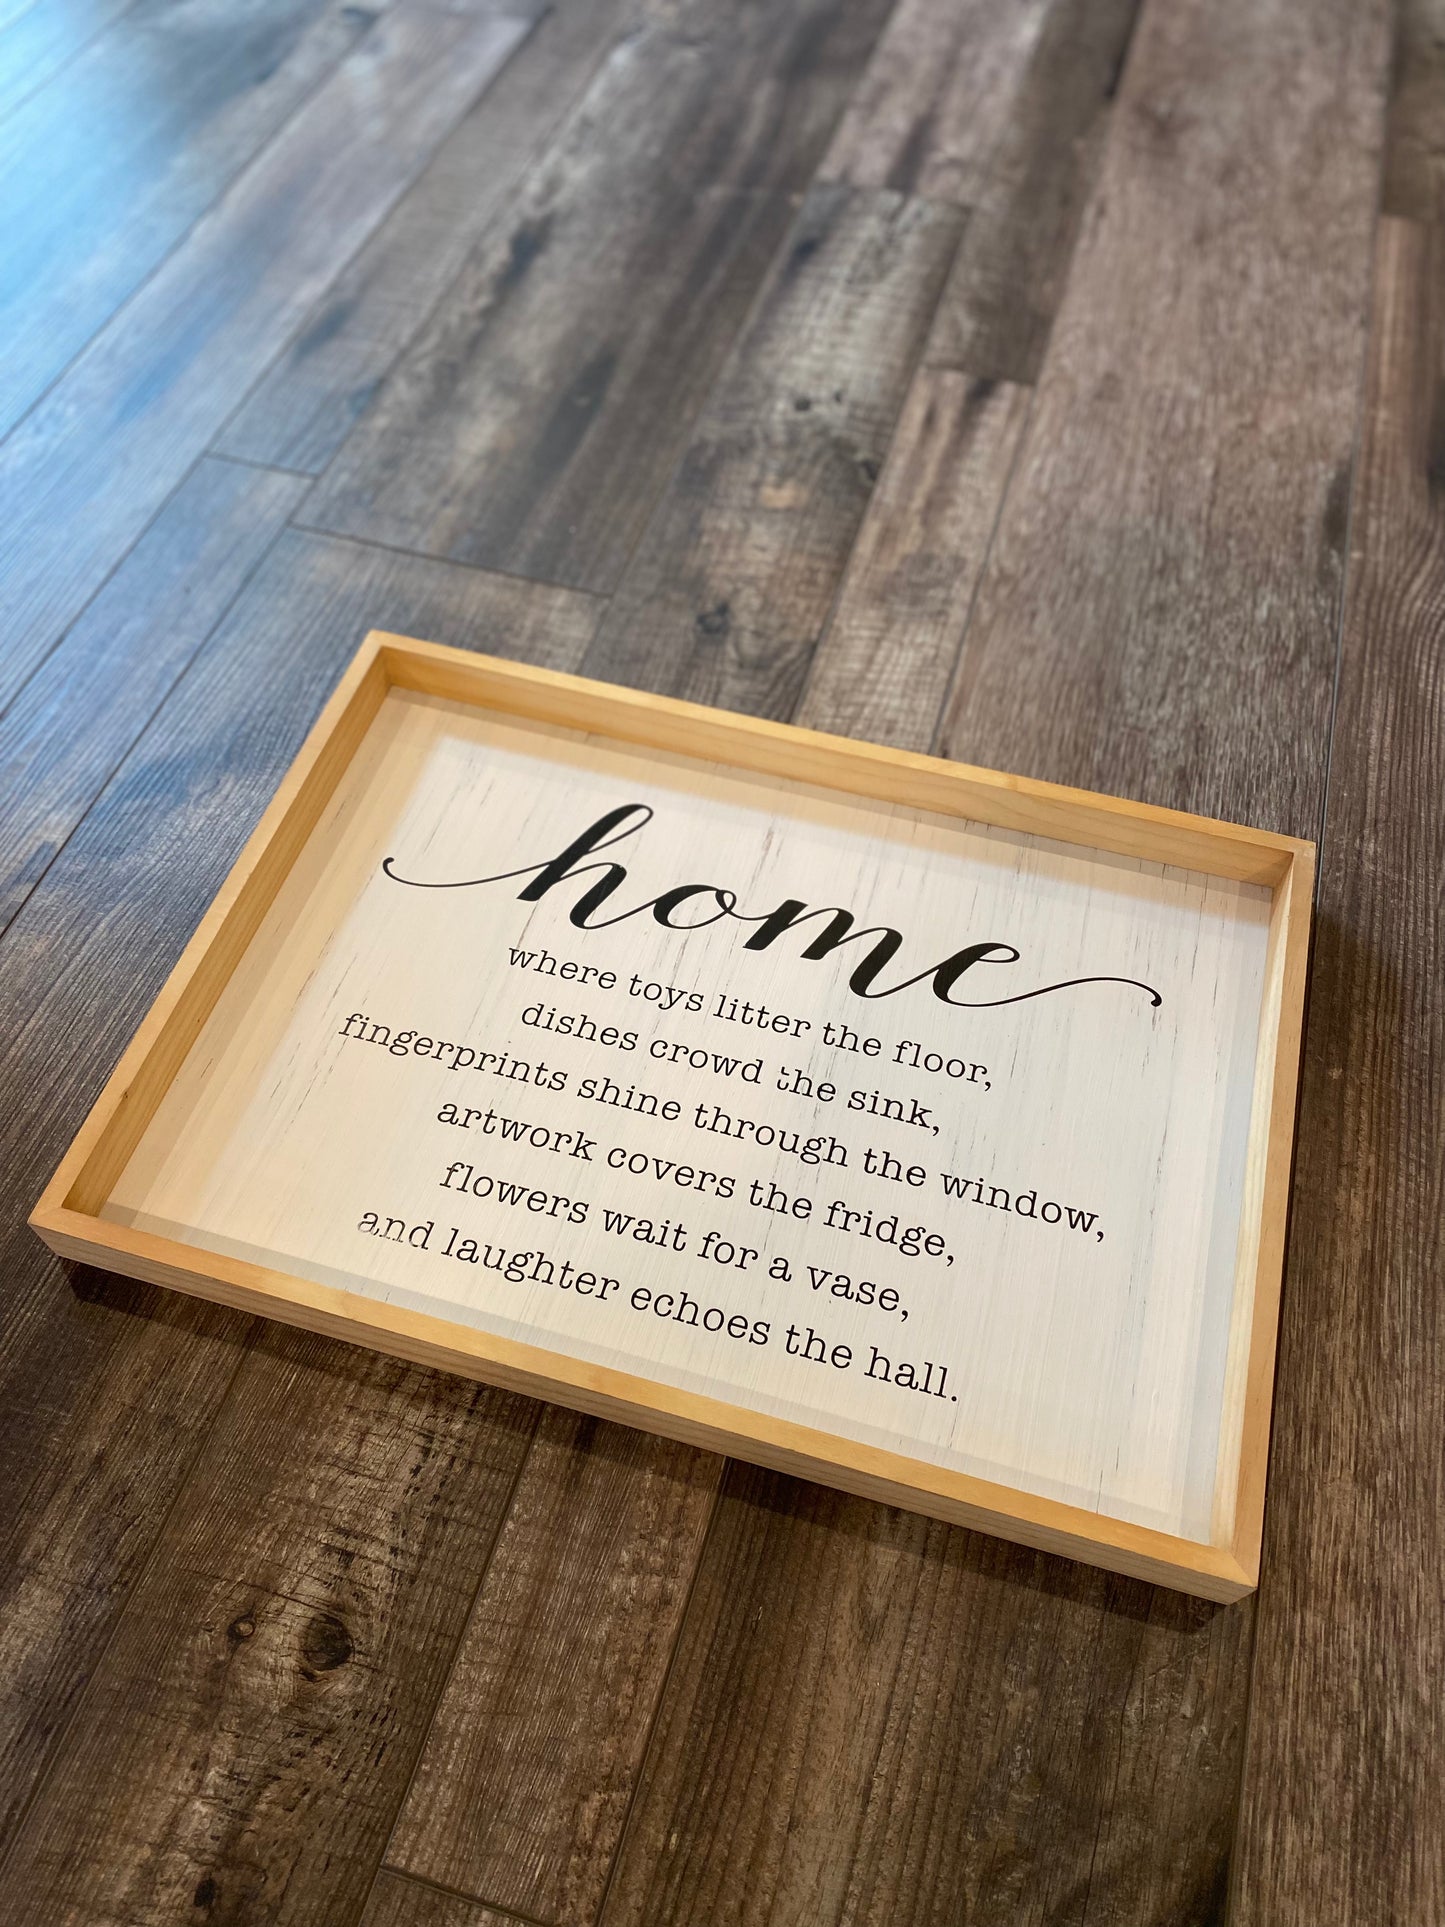 Home where toys litter the floor, dishes crowd the sink, fingerprints shine through the window, artwork covers the fridge, flowers wait for a vase and laughter echoes the hall. home decor sign. - Unavailable for shipping   In-store Pick up only. 